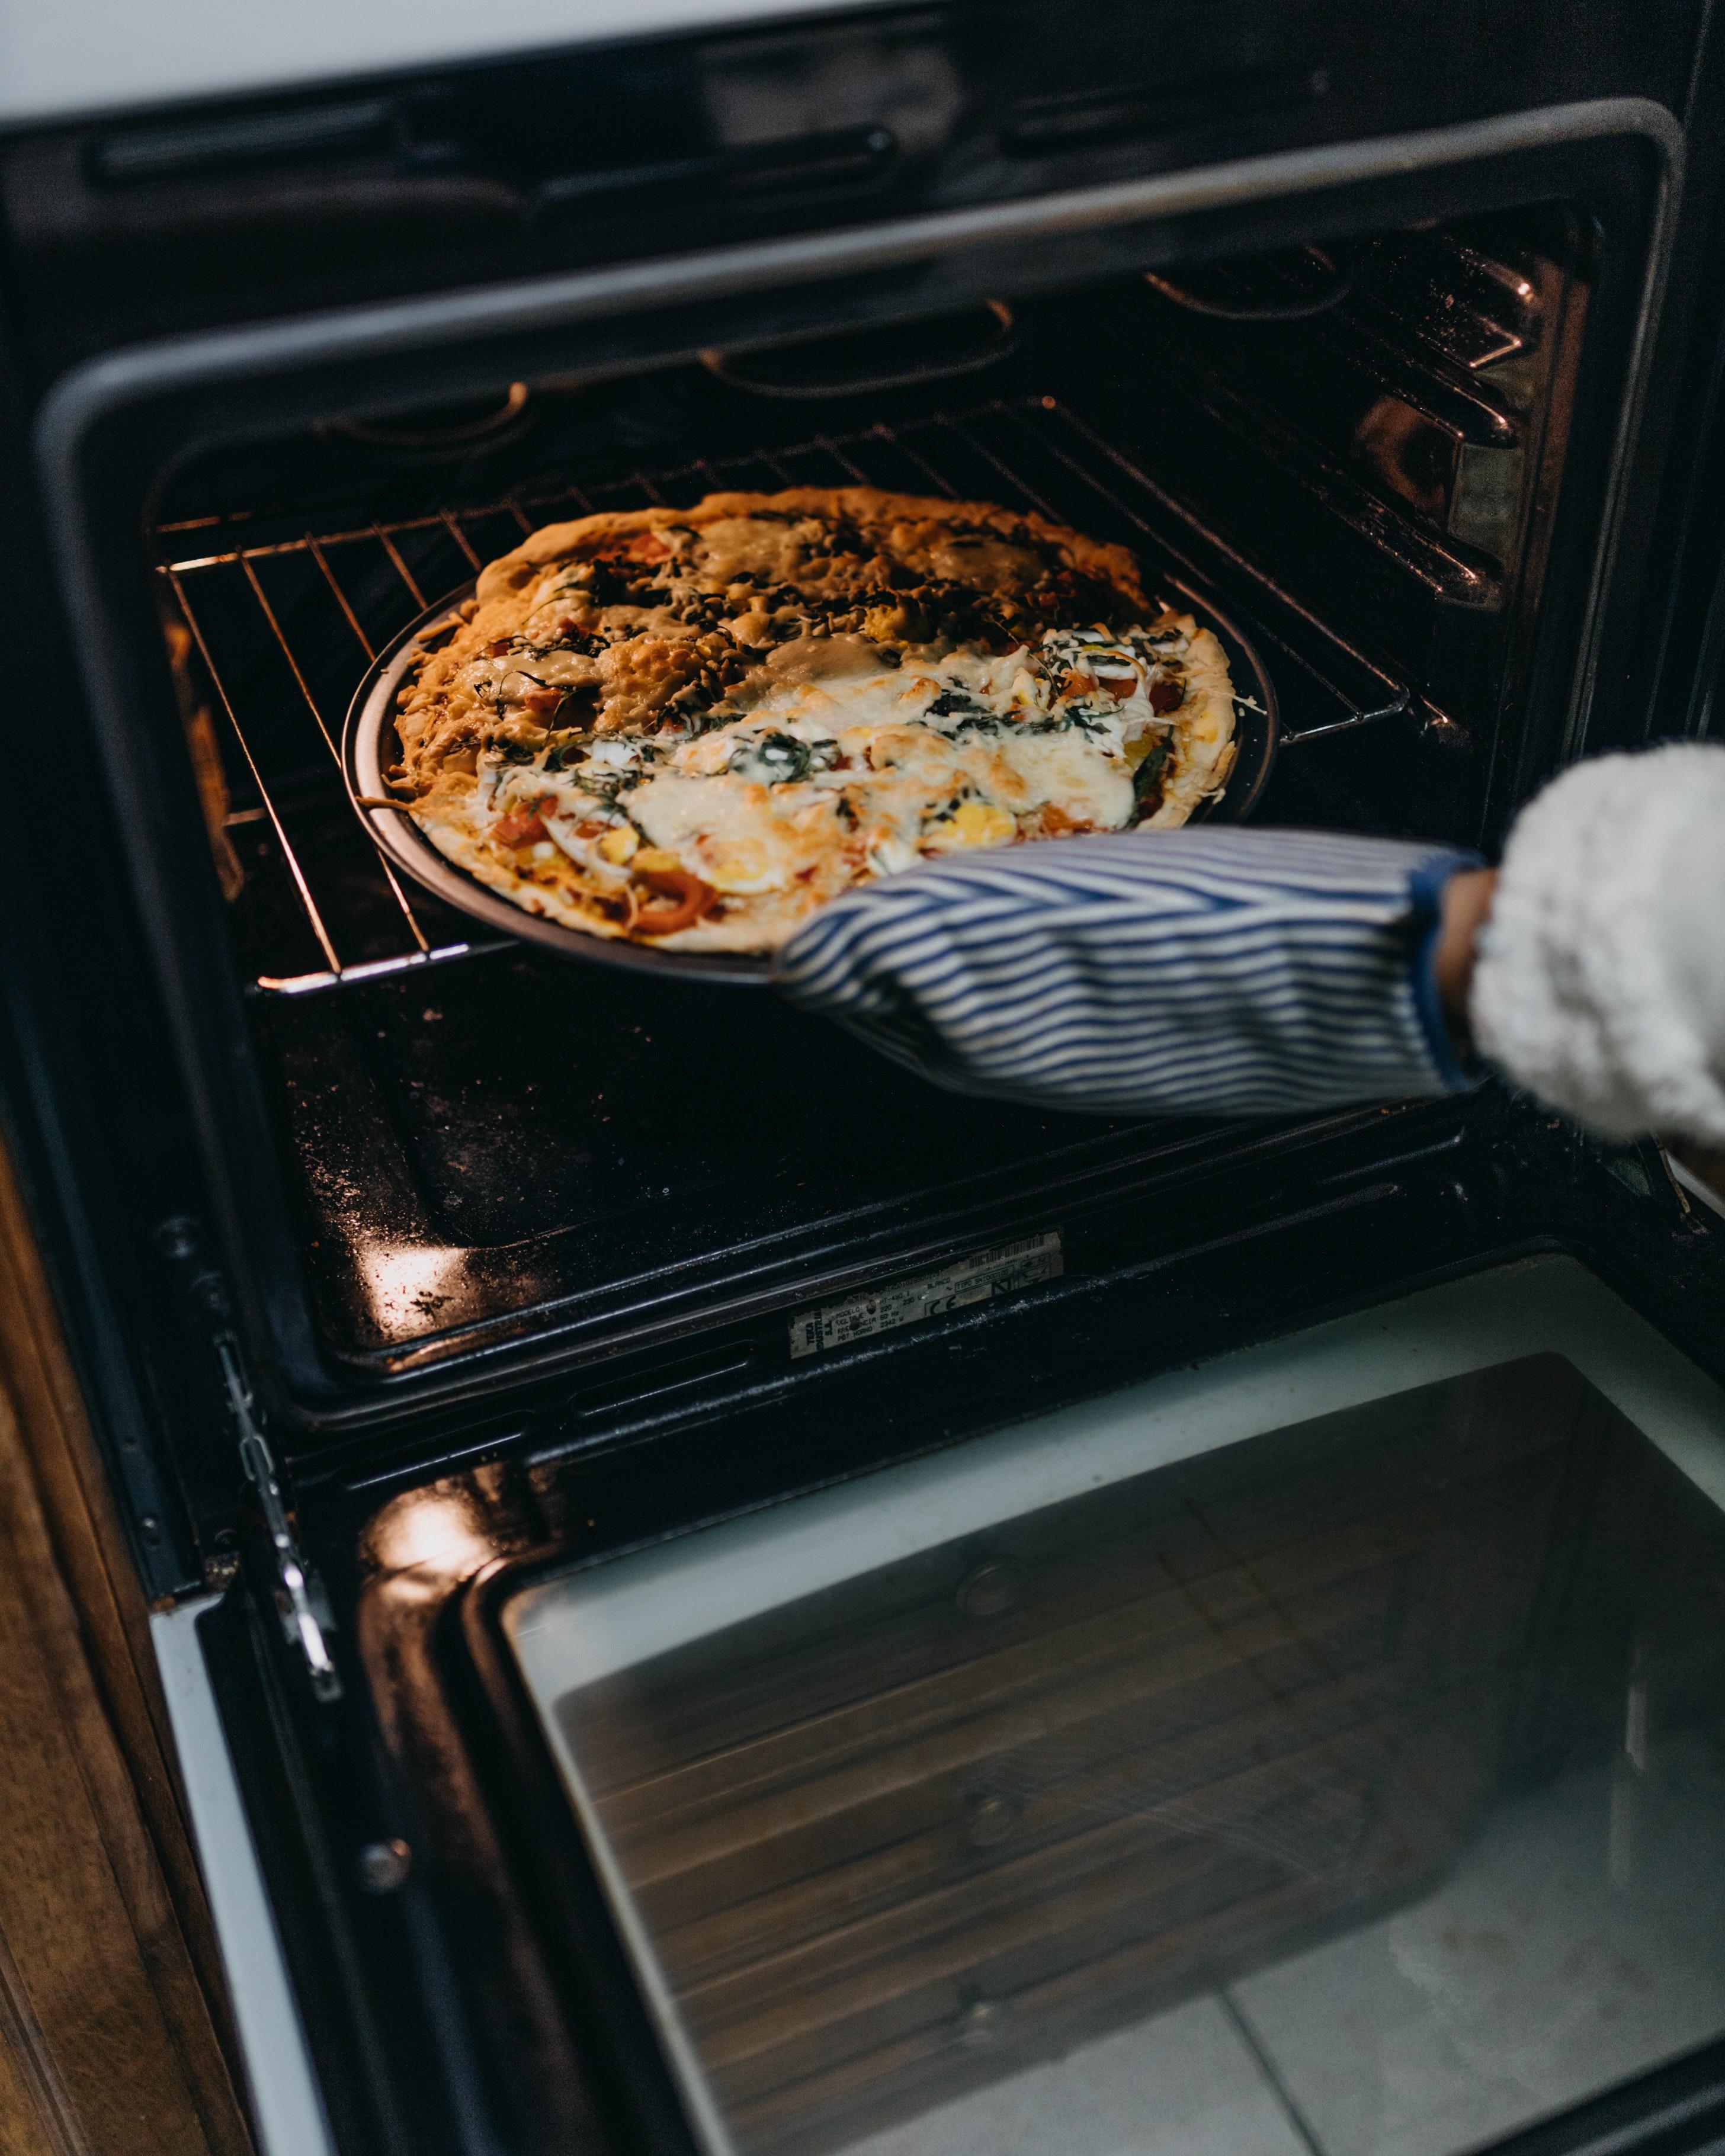  Can I Use An Oven Liner In A Convection Oven 